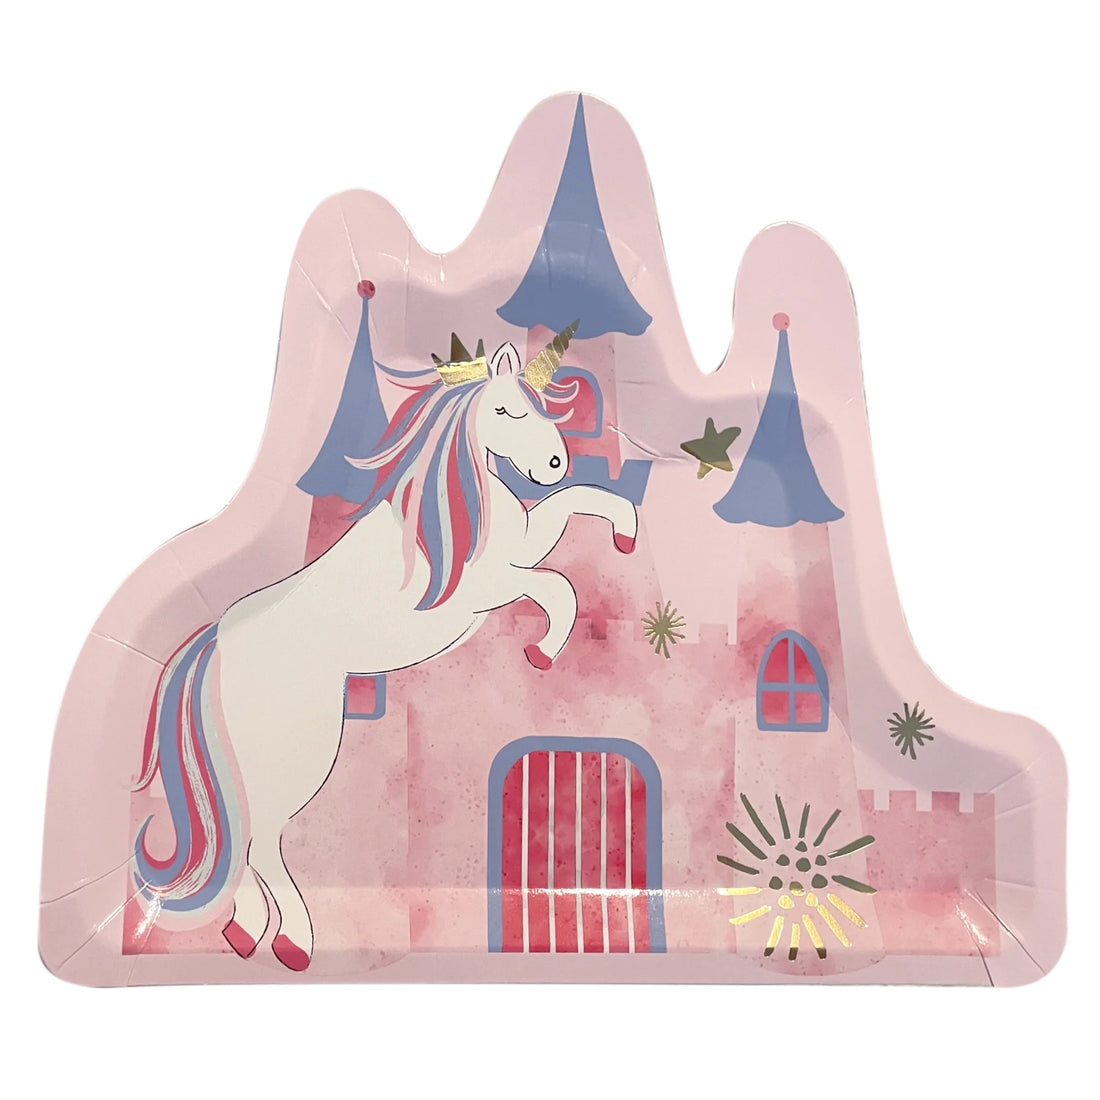 A whimsical Dreams Come True Paper Dinner Plate featuring a castle-shaped design with a majestic unicorn. Perfect for adding elegance to any event. From Party Social, your go-to for party supplies.